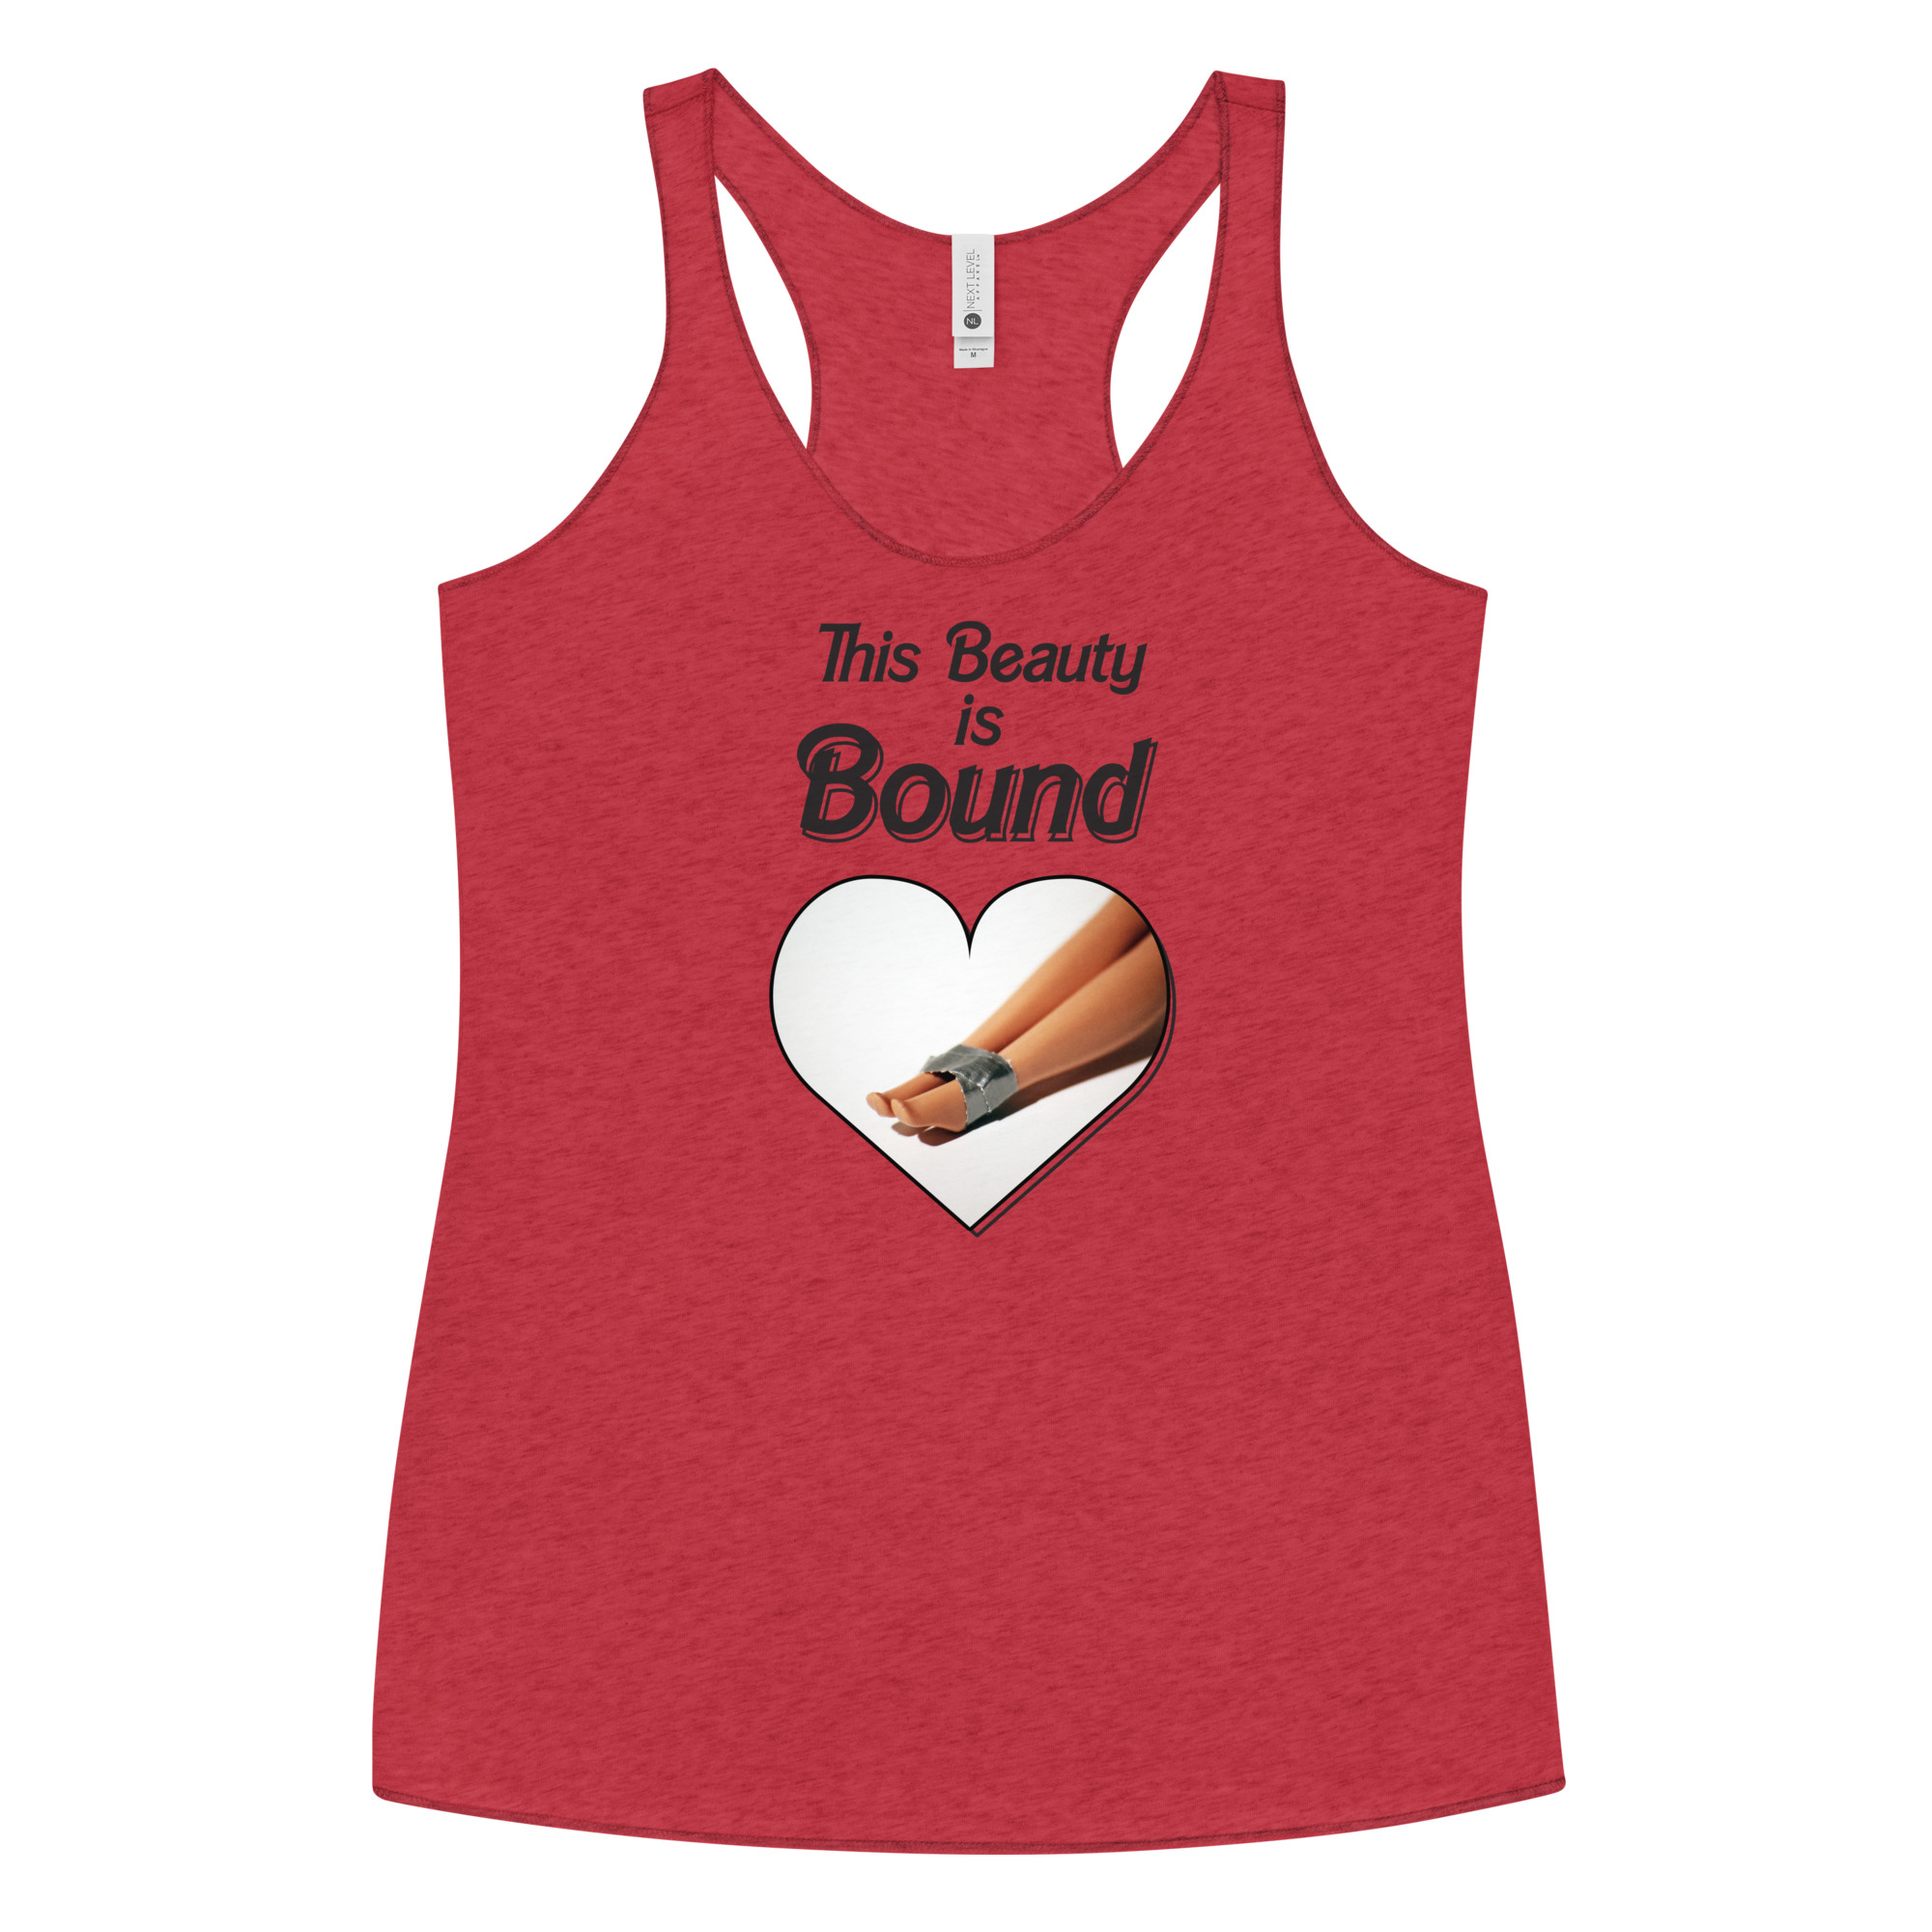 This Beauty is Bound Tank Top by Wilde Designs